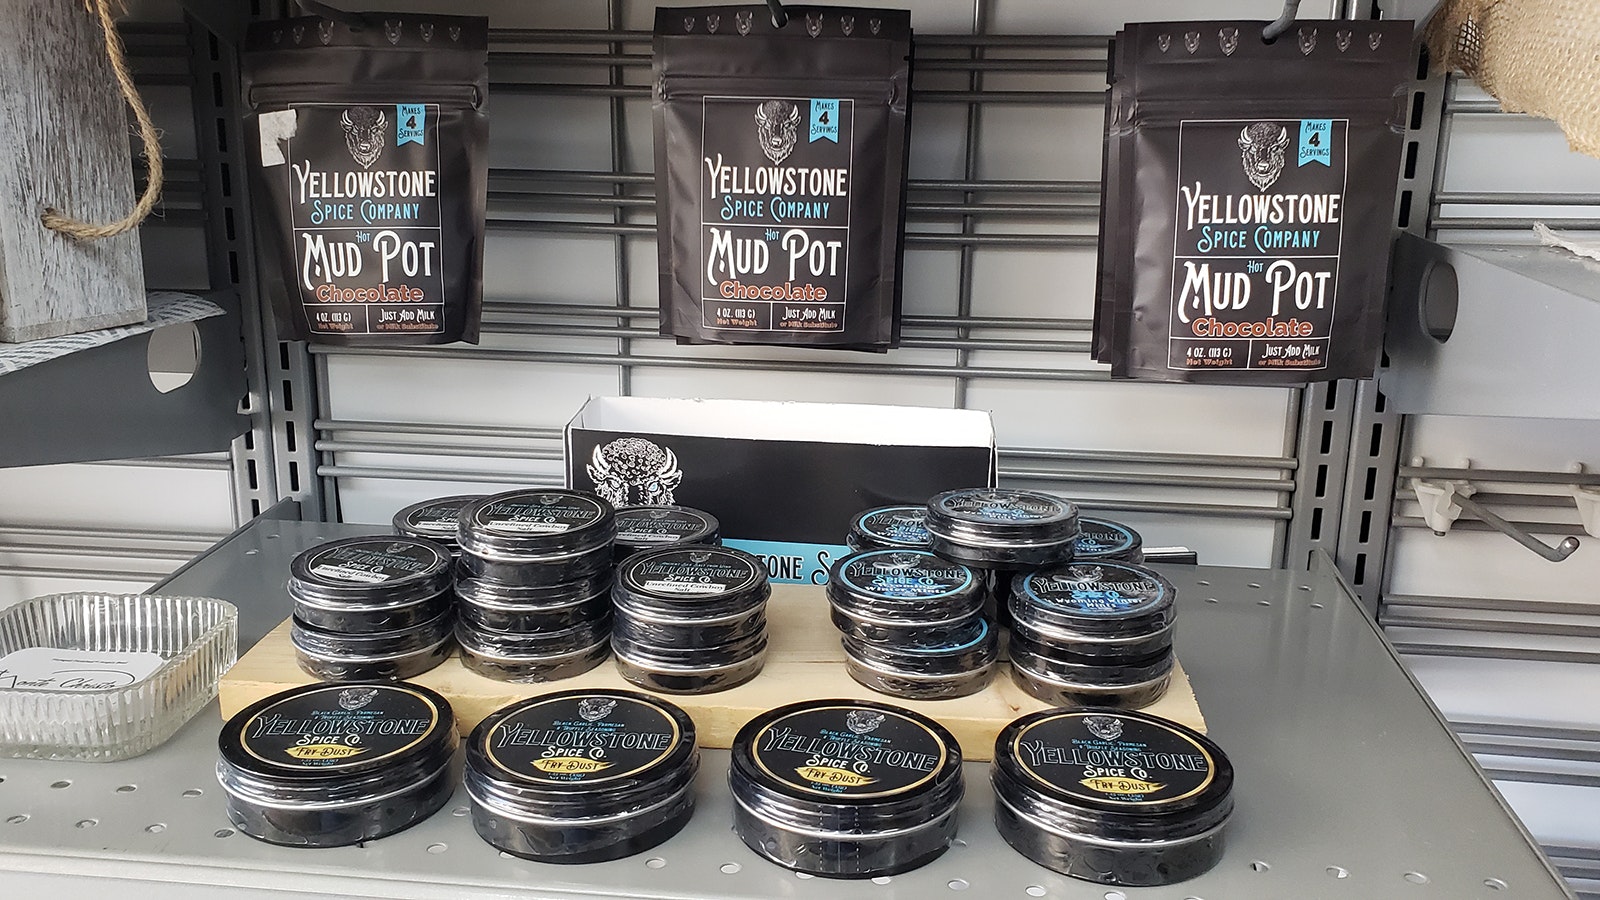 Yellowstone Spice Co. offers a variety of spice mixes.